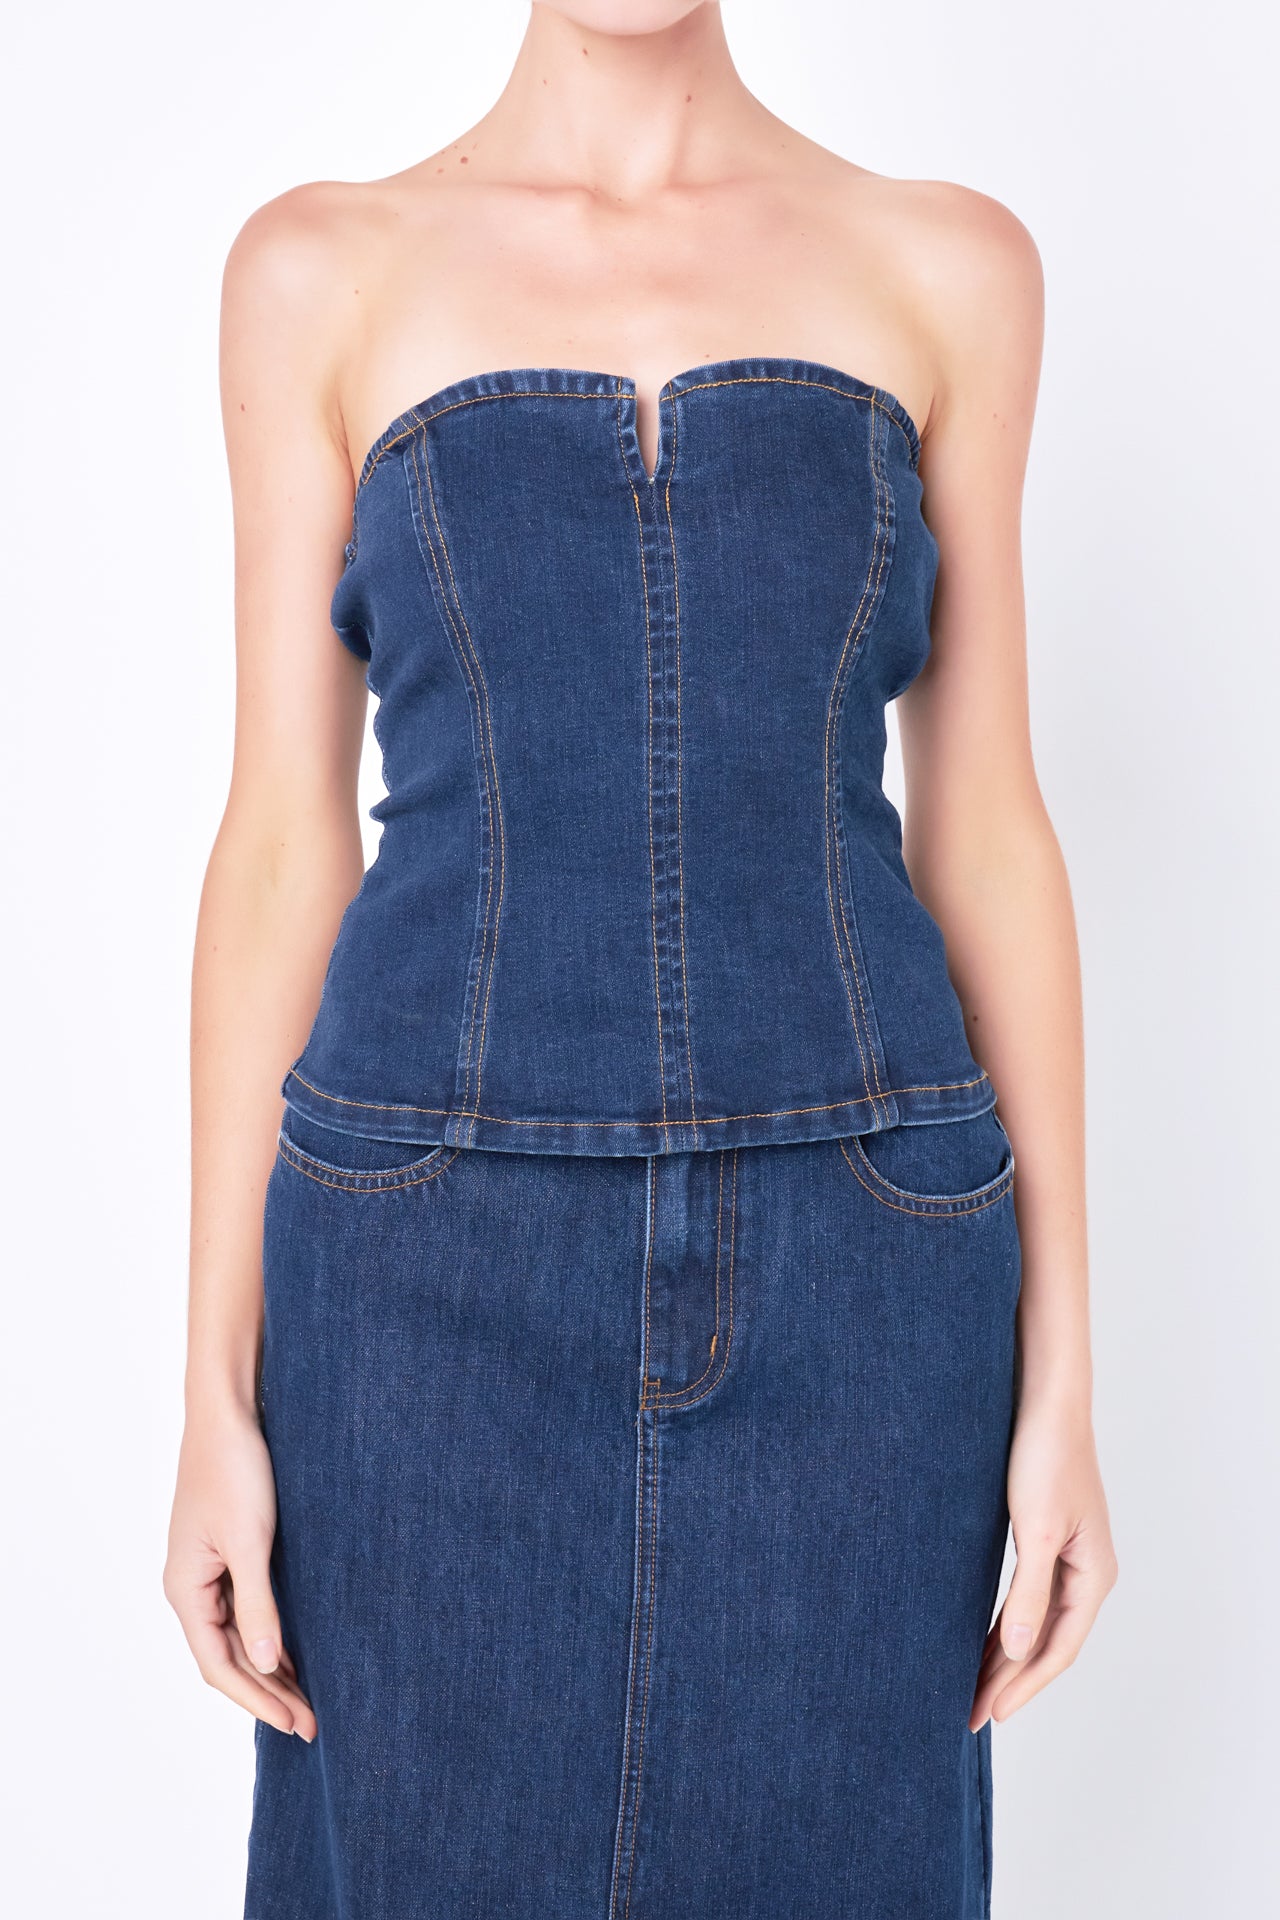 GREY LAB - Strapless Tube Denim Top - TOPS available at Objectrare